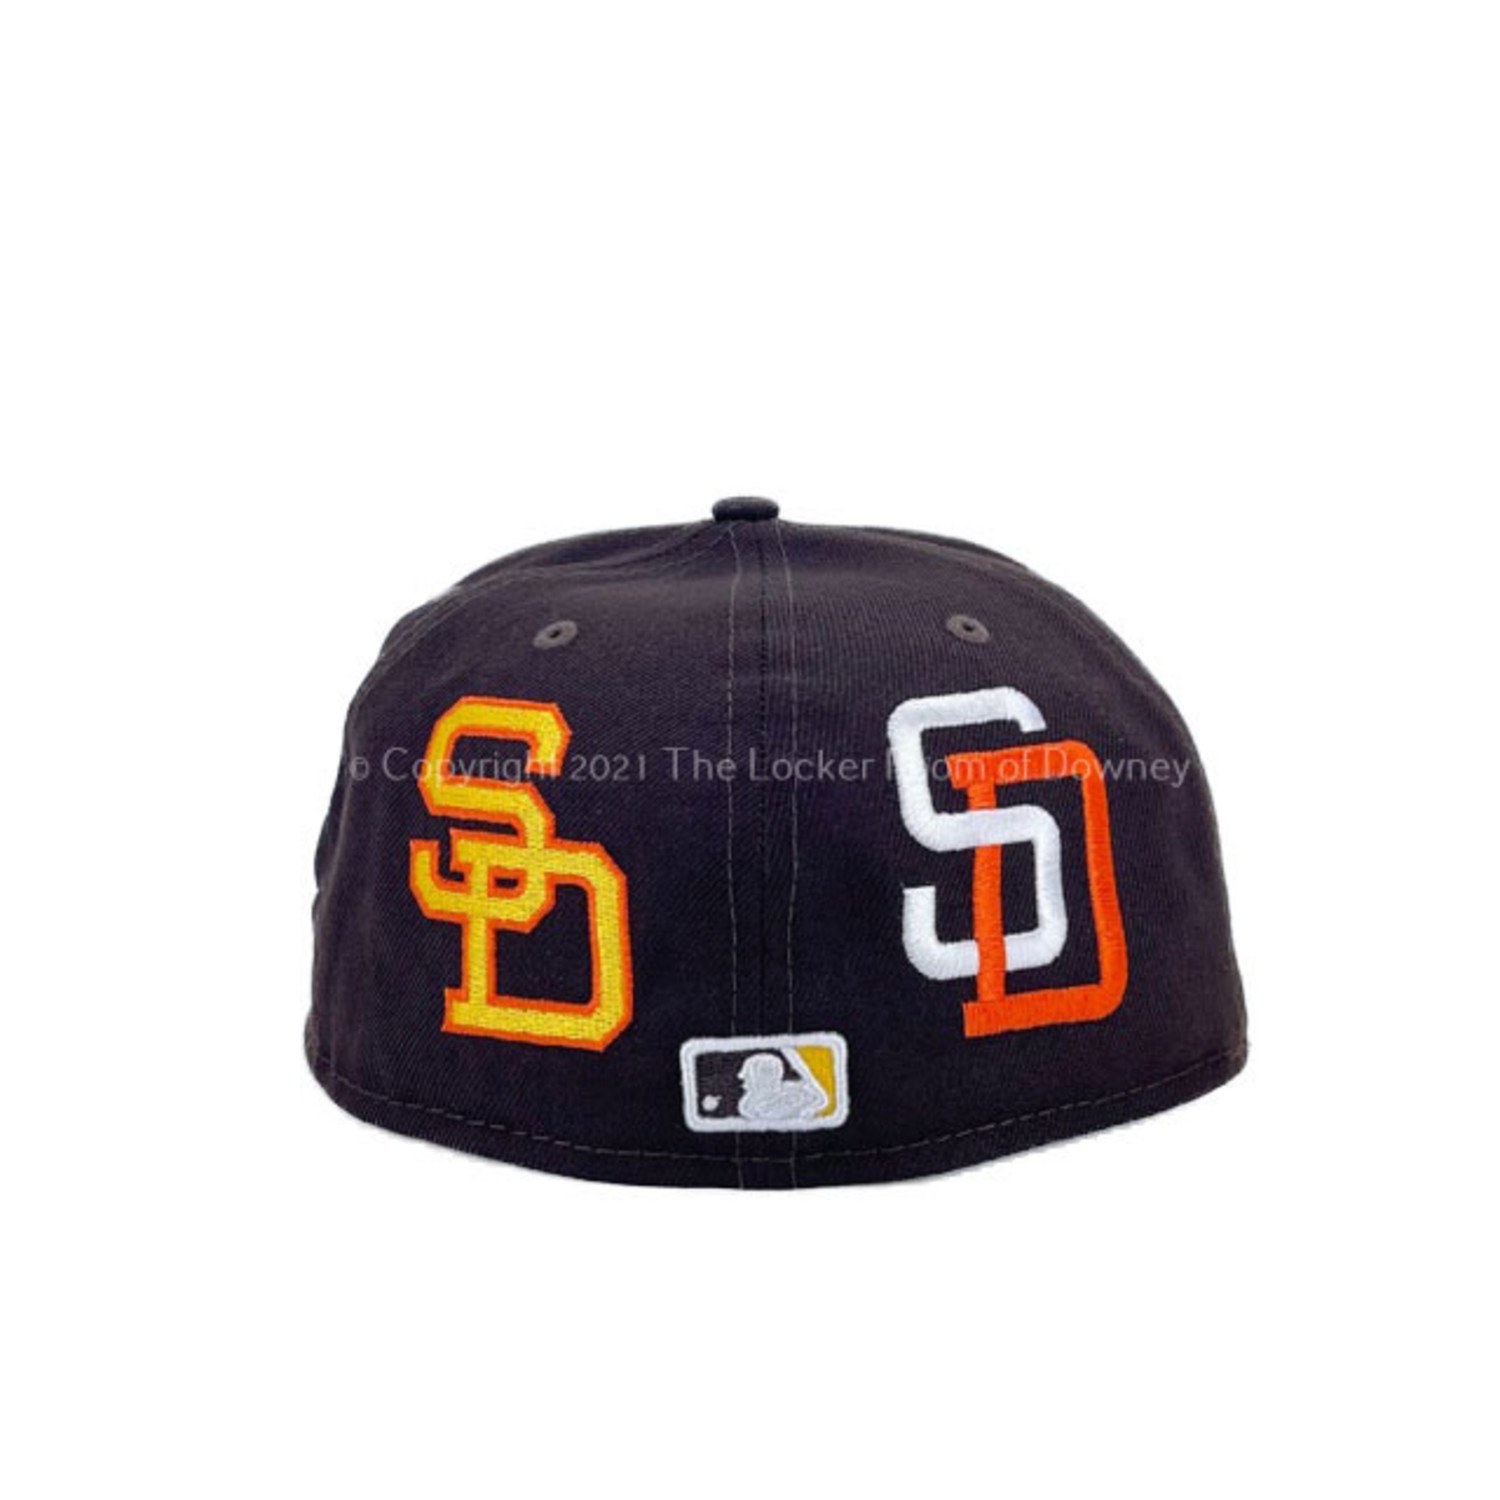 ISO this padres cap WITHOUT the side patch. Any help would greatly be  appreciated. (padres city connect with grey uv, no side patch). :  r/neweracaps